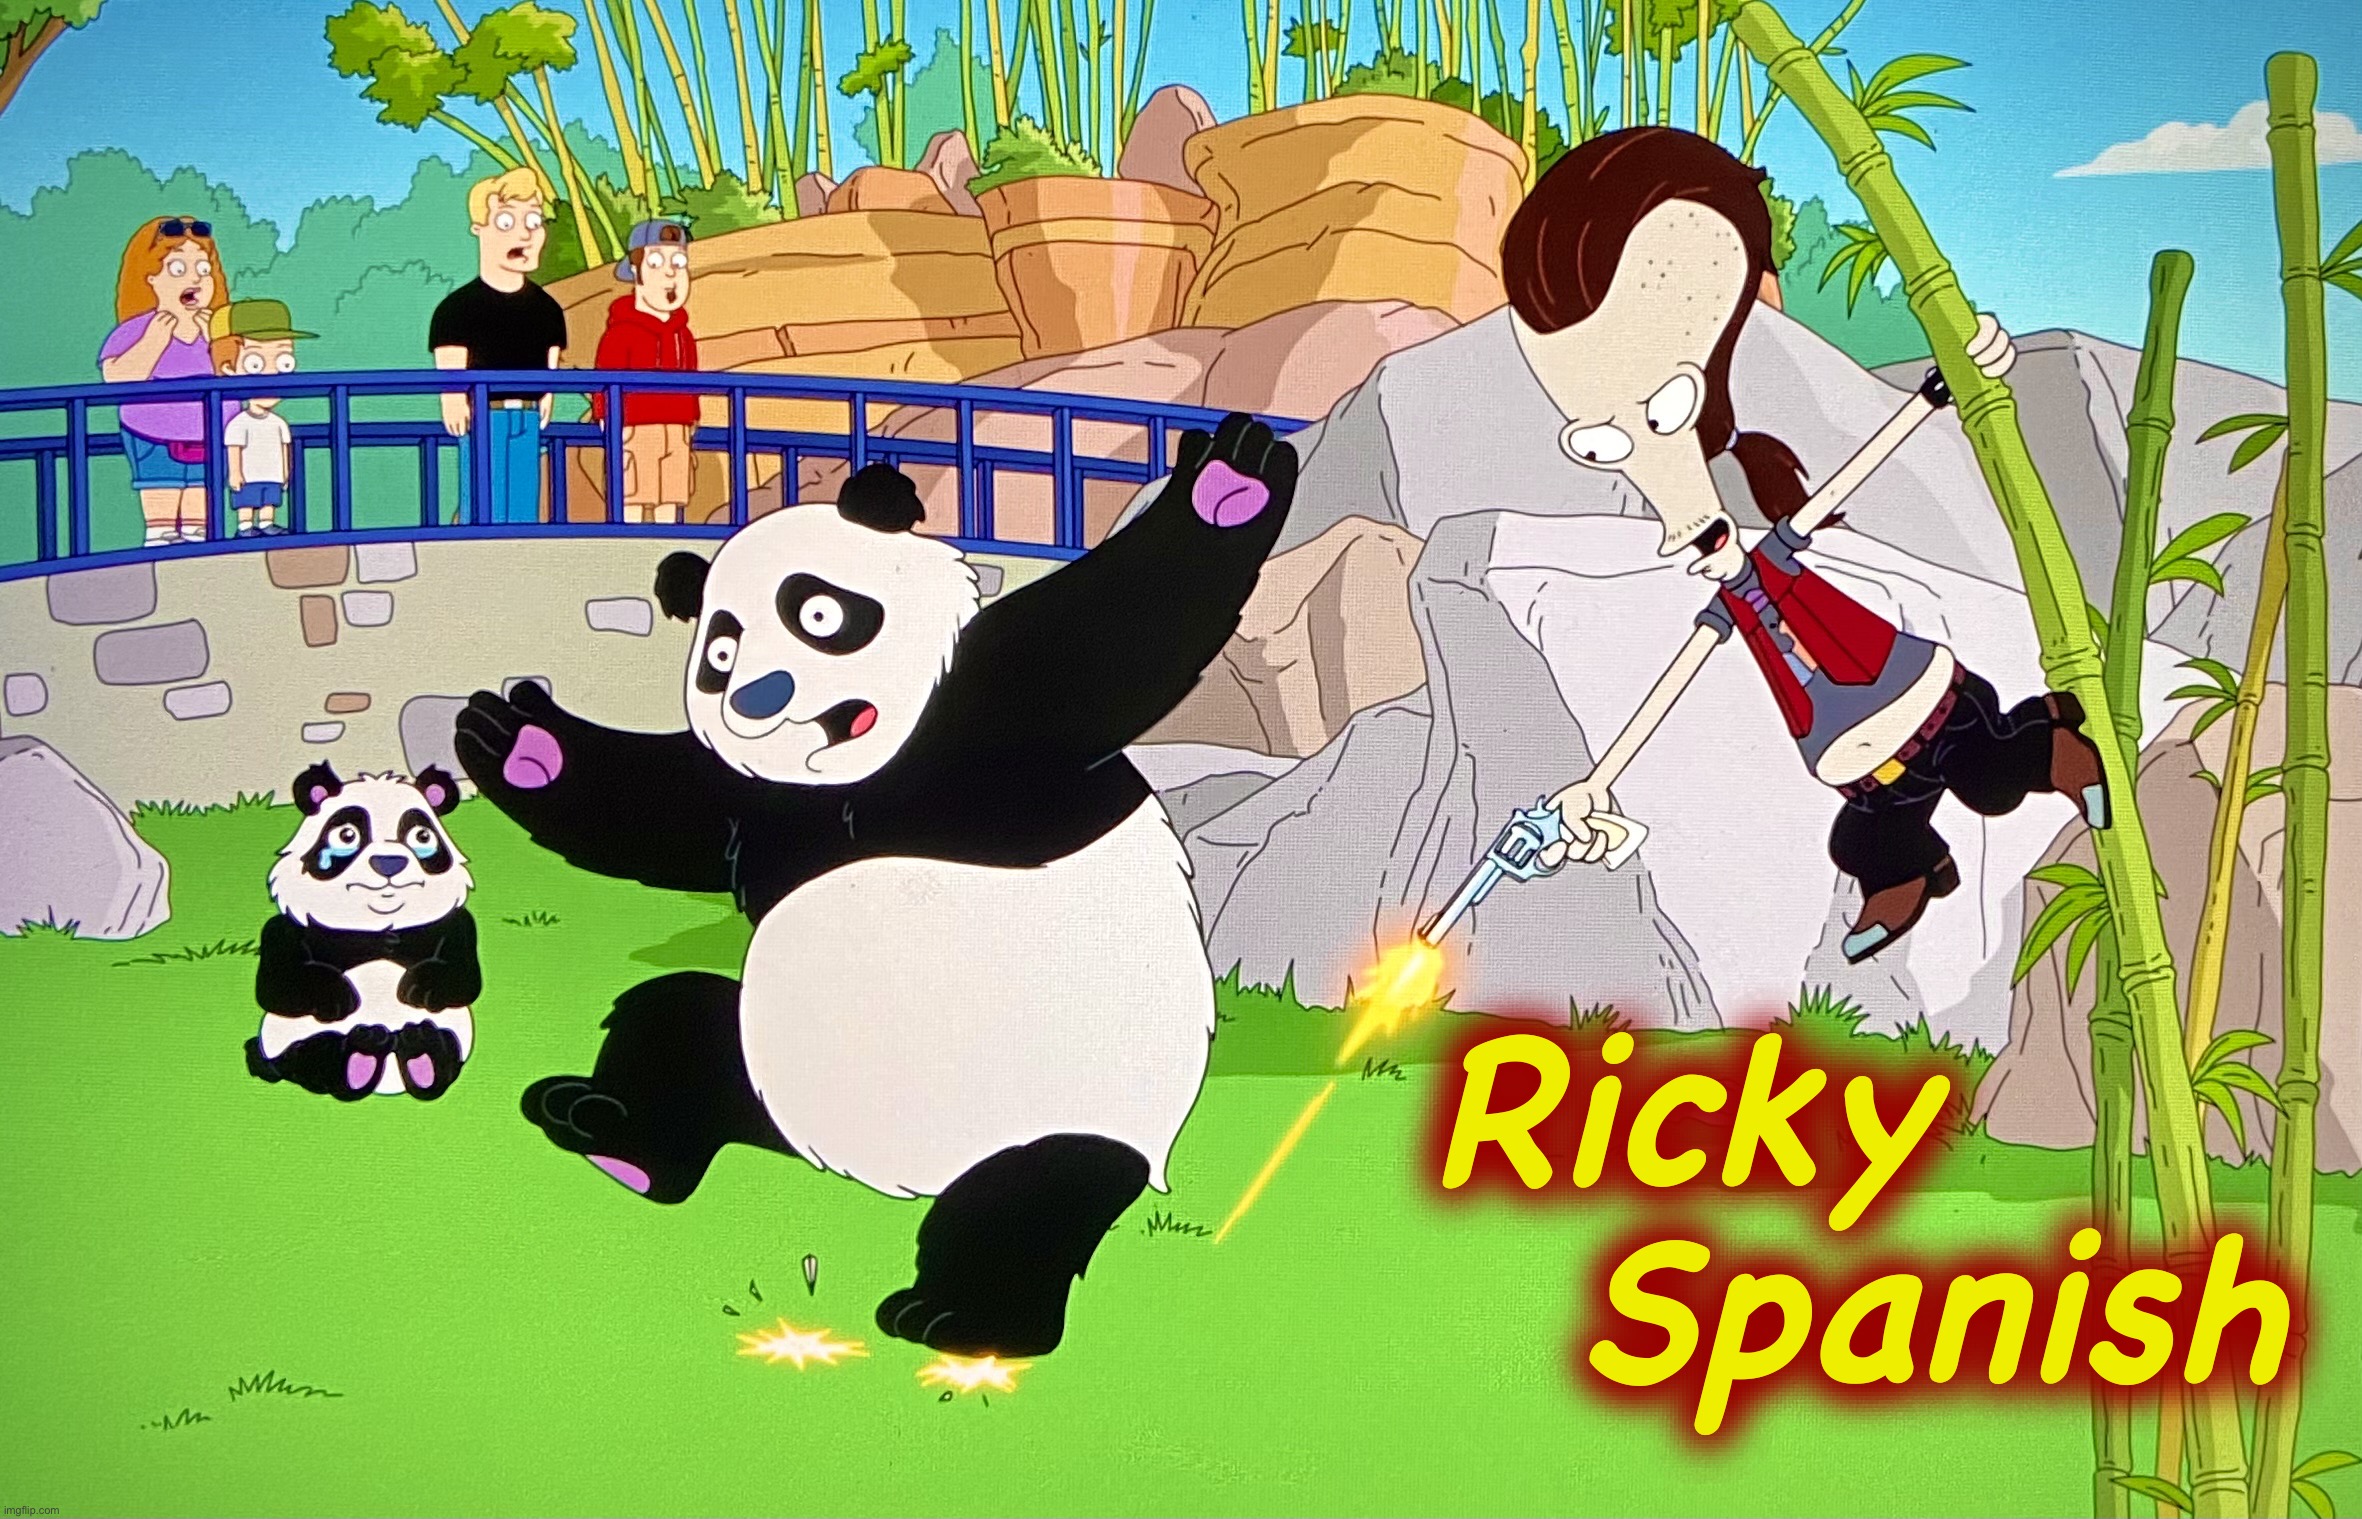 Not everyone loves pandas | Ricky       Spanish | image tagged in ricky spanish,panda,memes,uncle roger,american dad,dance | made w/ Imgflip meme maker